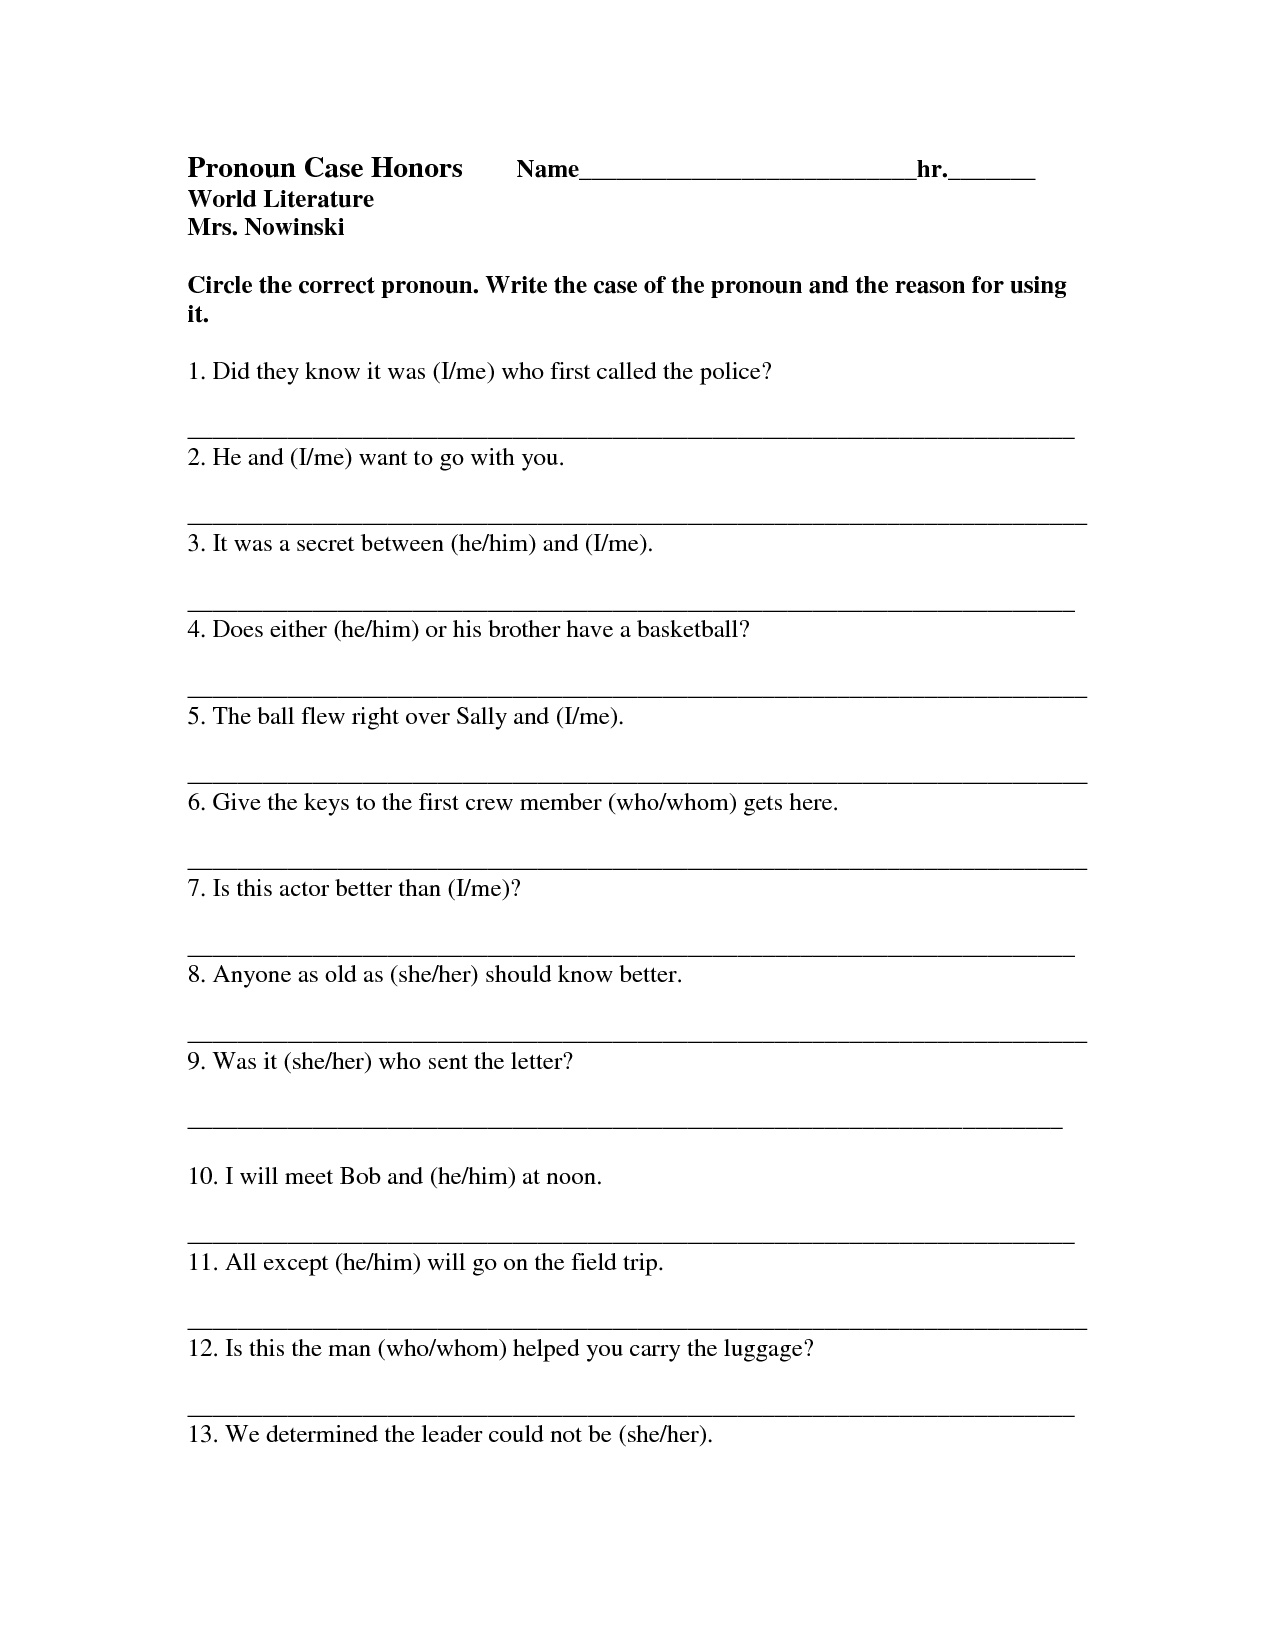 17 Best Images Of Correct Pronoun Worksheets Pronoun Worksheets Nouns And Pronouns Worksheet